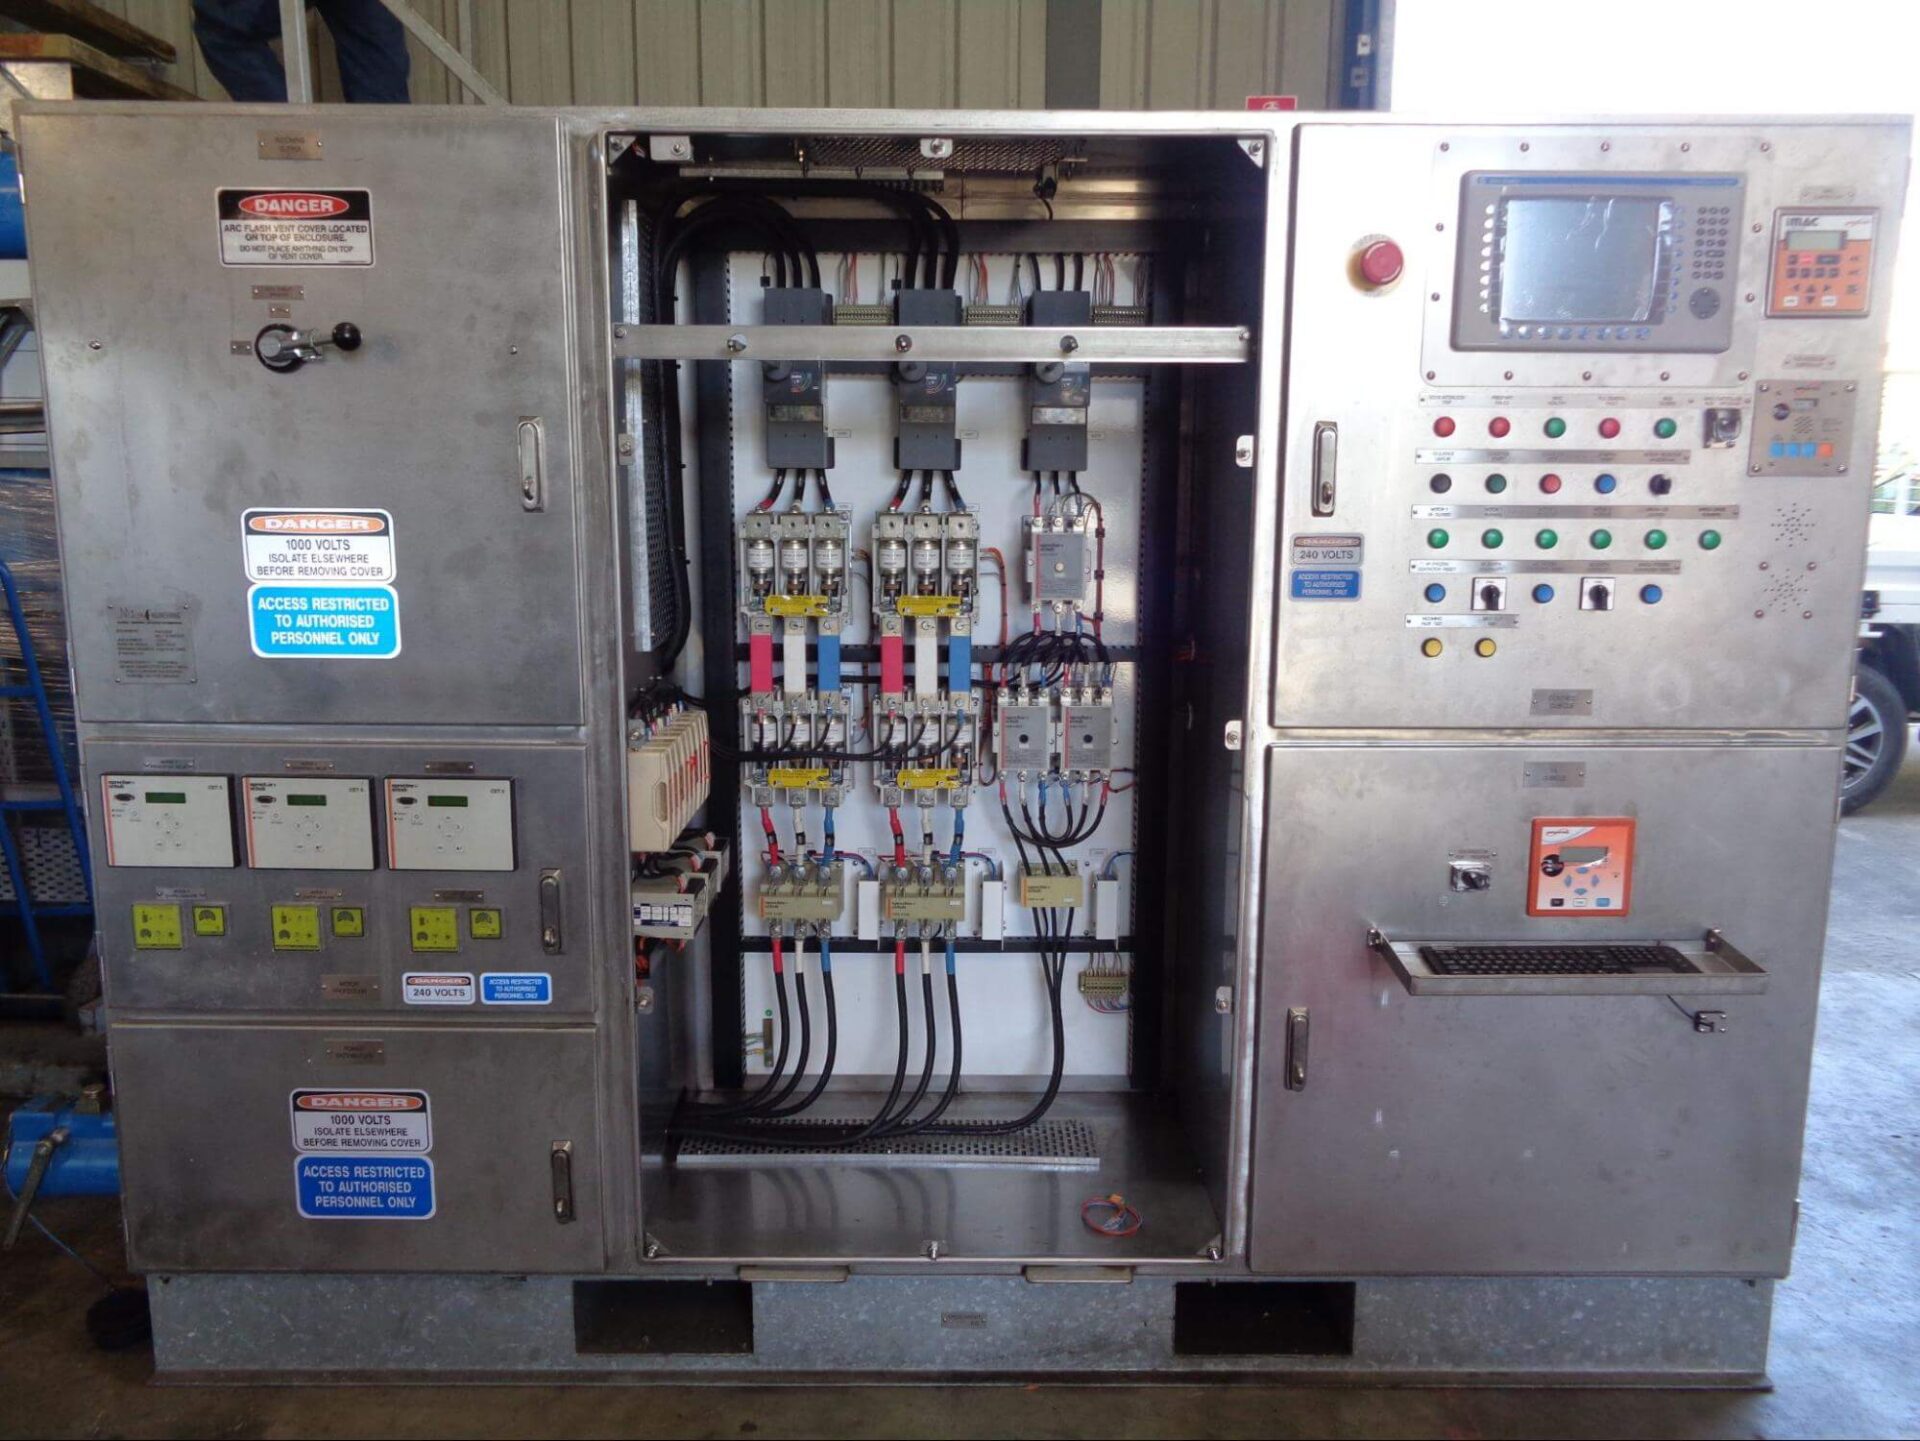  Services & Maintenance - WVF Winder Control Panel at Milek Engineering